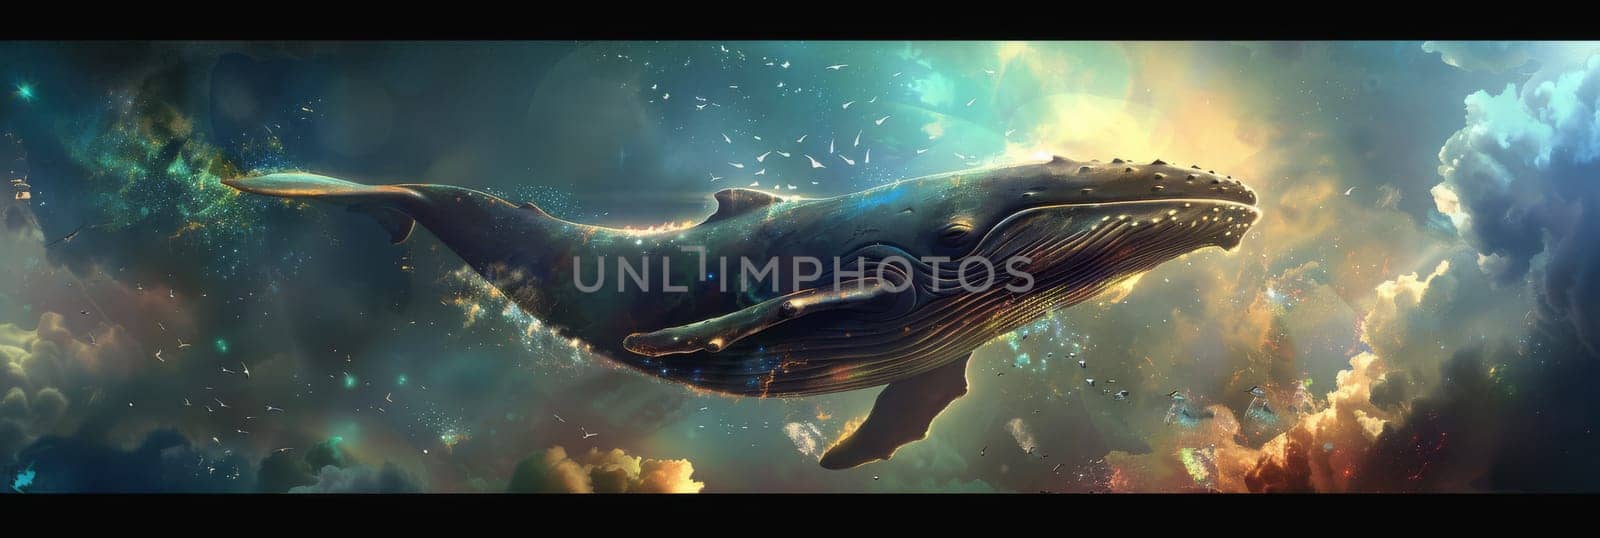 A whale is swimming in the ocean by AI generated image.